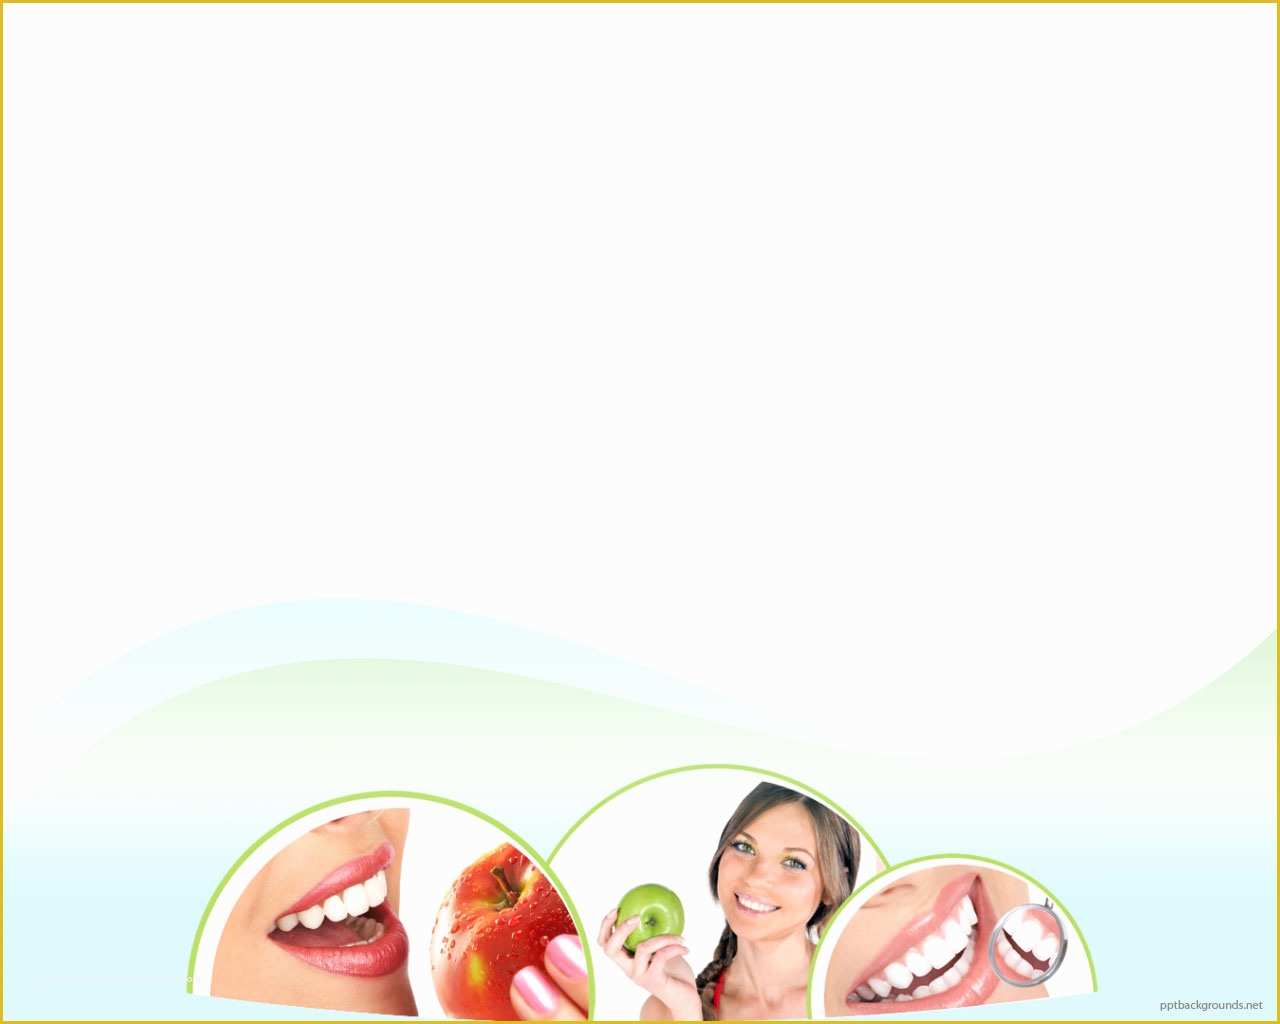 Free Health and Nutrition Powerpoint Templates Of Foot Health Backgrounds for Powerpoint Health and